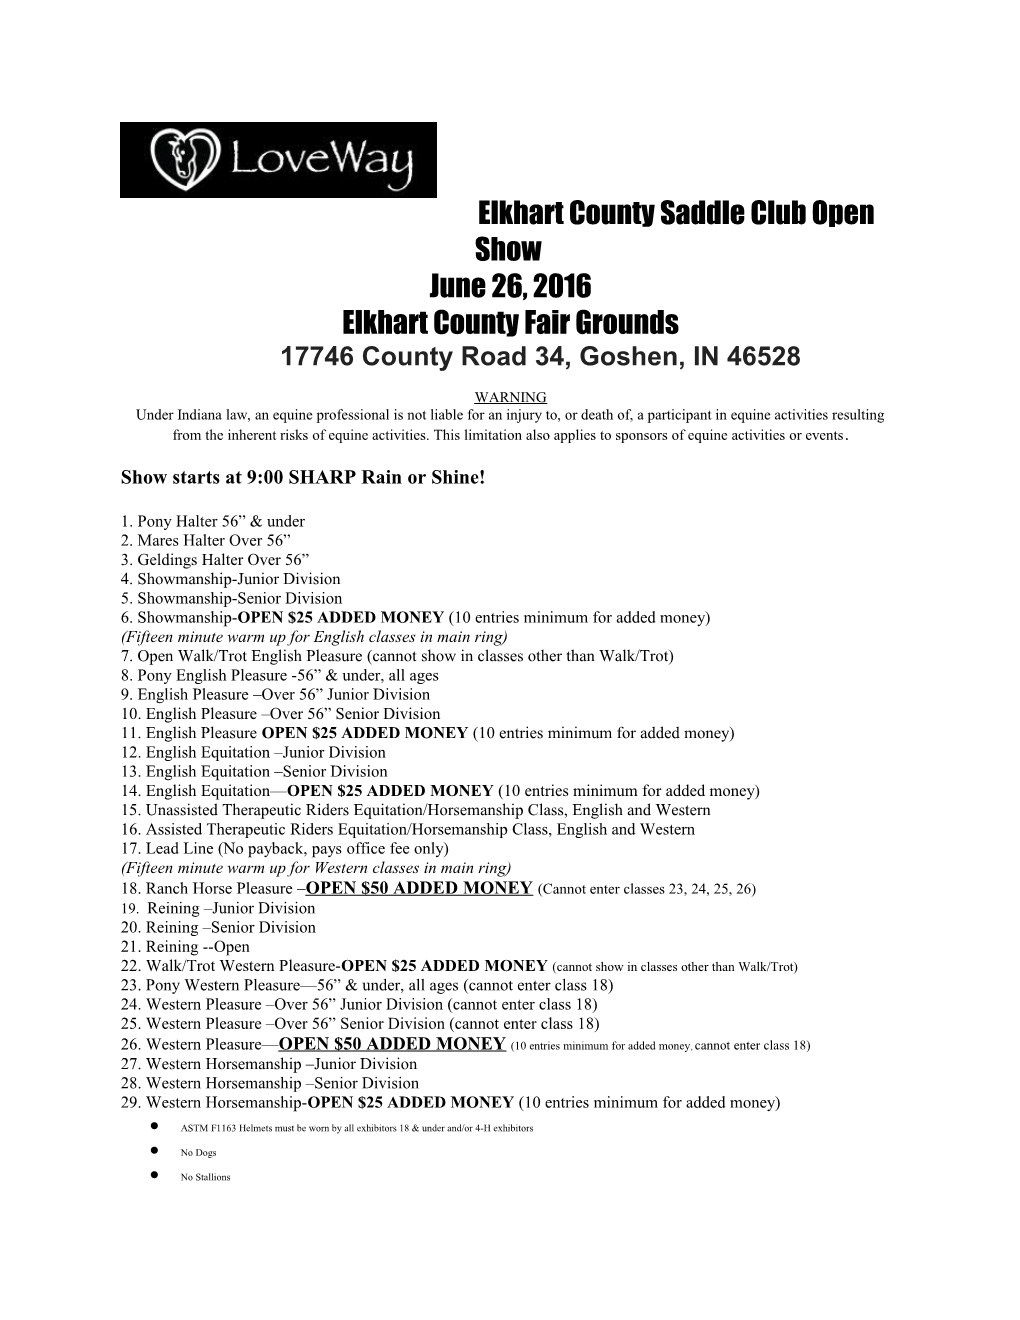 Elkhart County Saddle Club Open Show